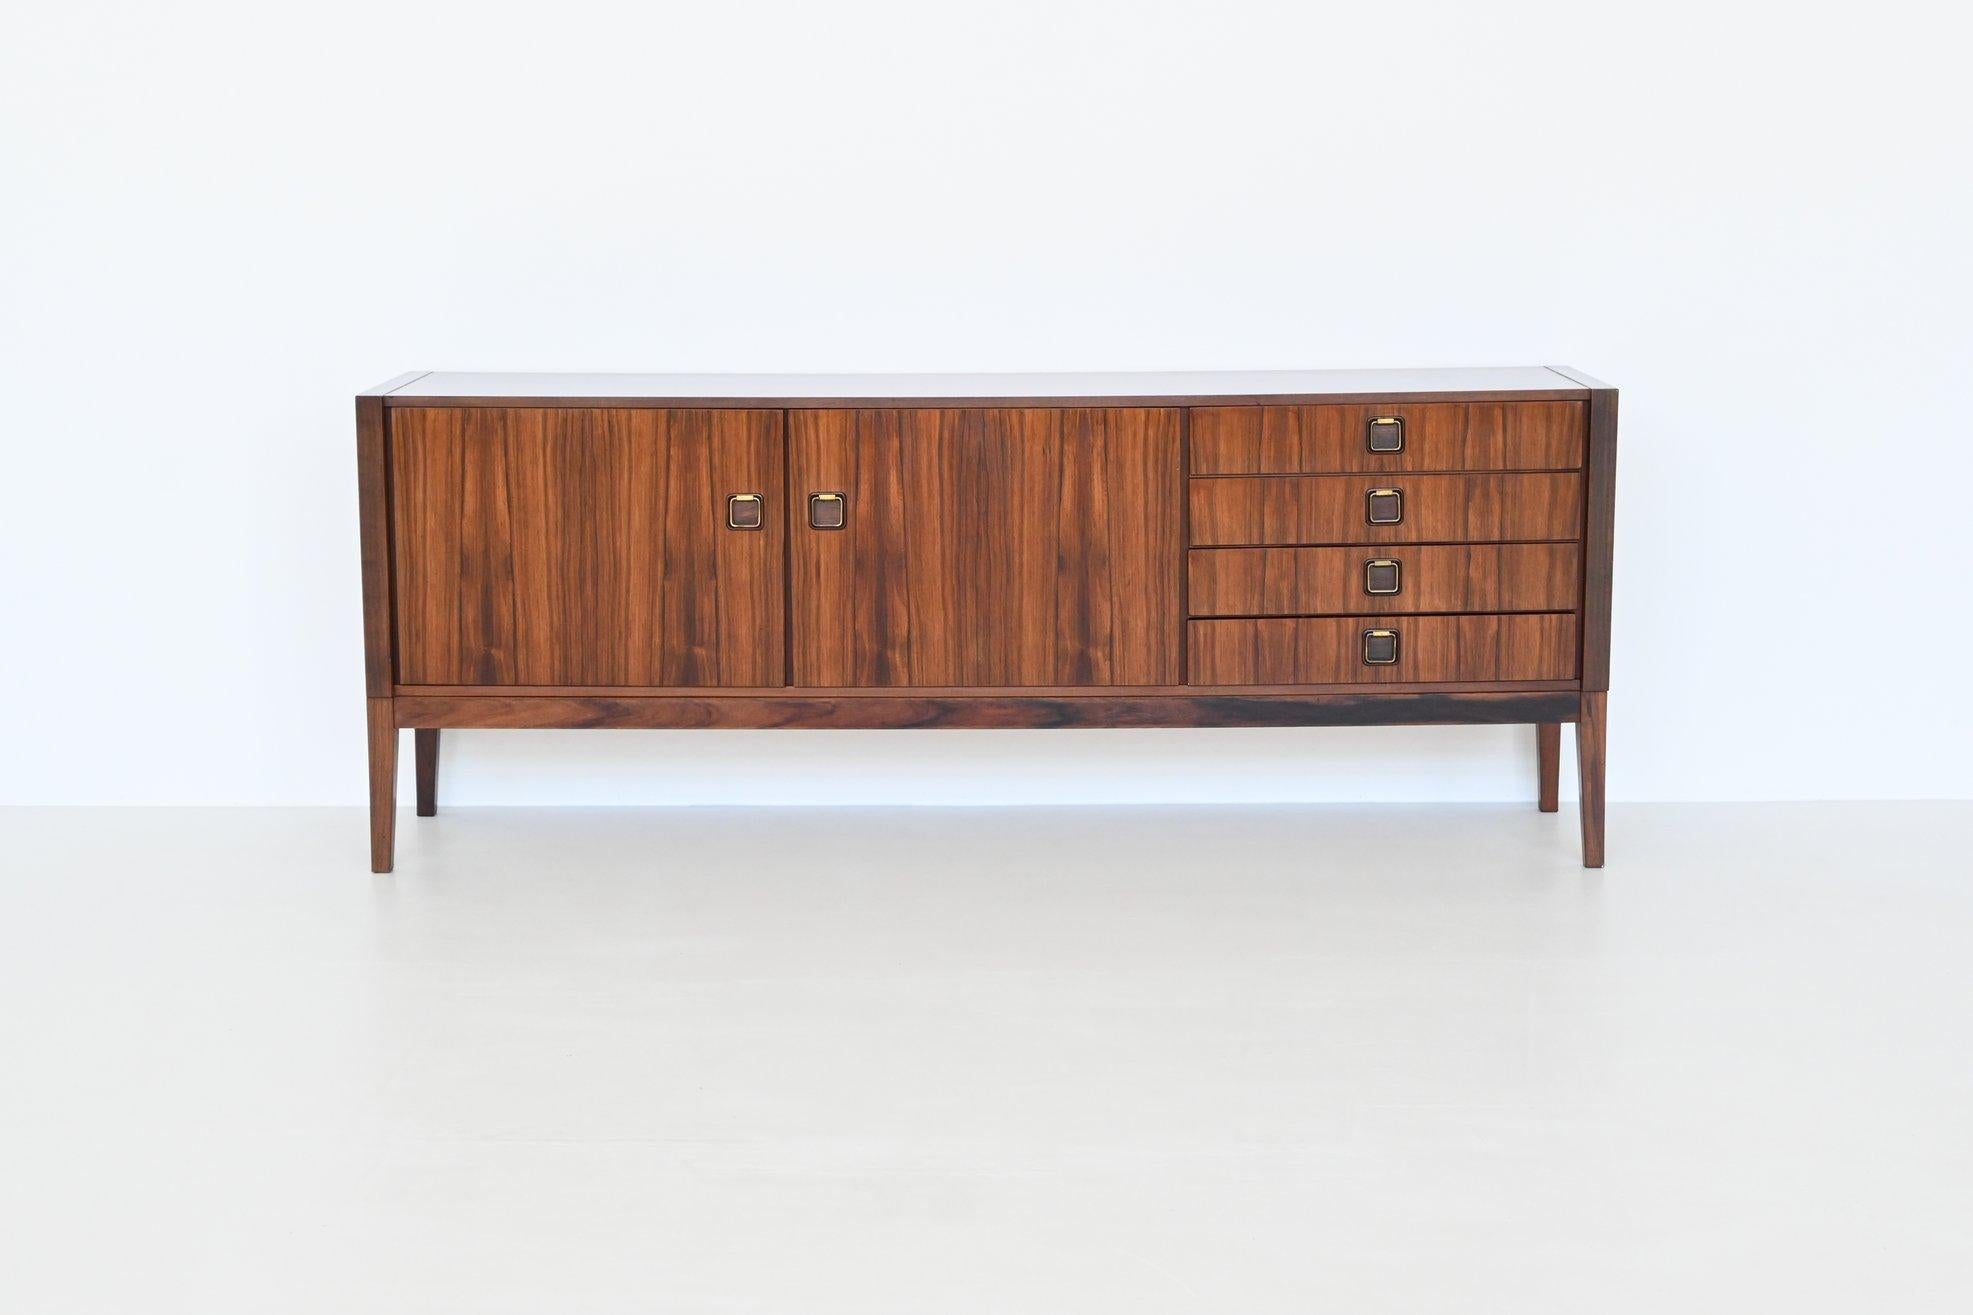 Beautiful sideboard or credenza manufactured by Topform, The Netherlands 1960. This very nice slim shaped sideboard is made of beautifully grained veneered rosewood with solid legs. Even the inside door panels are beautiful flamed. It has two doors